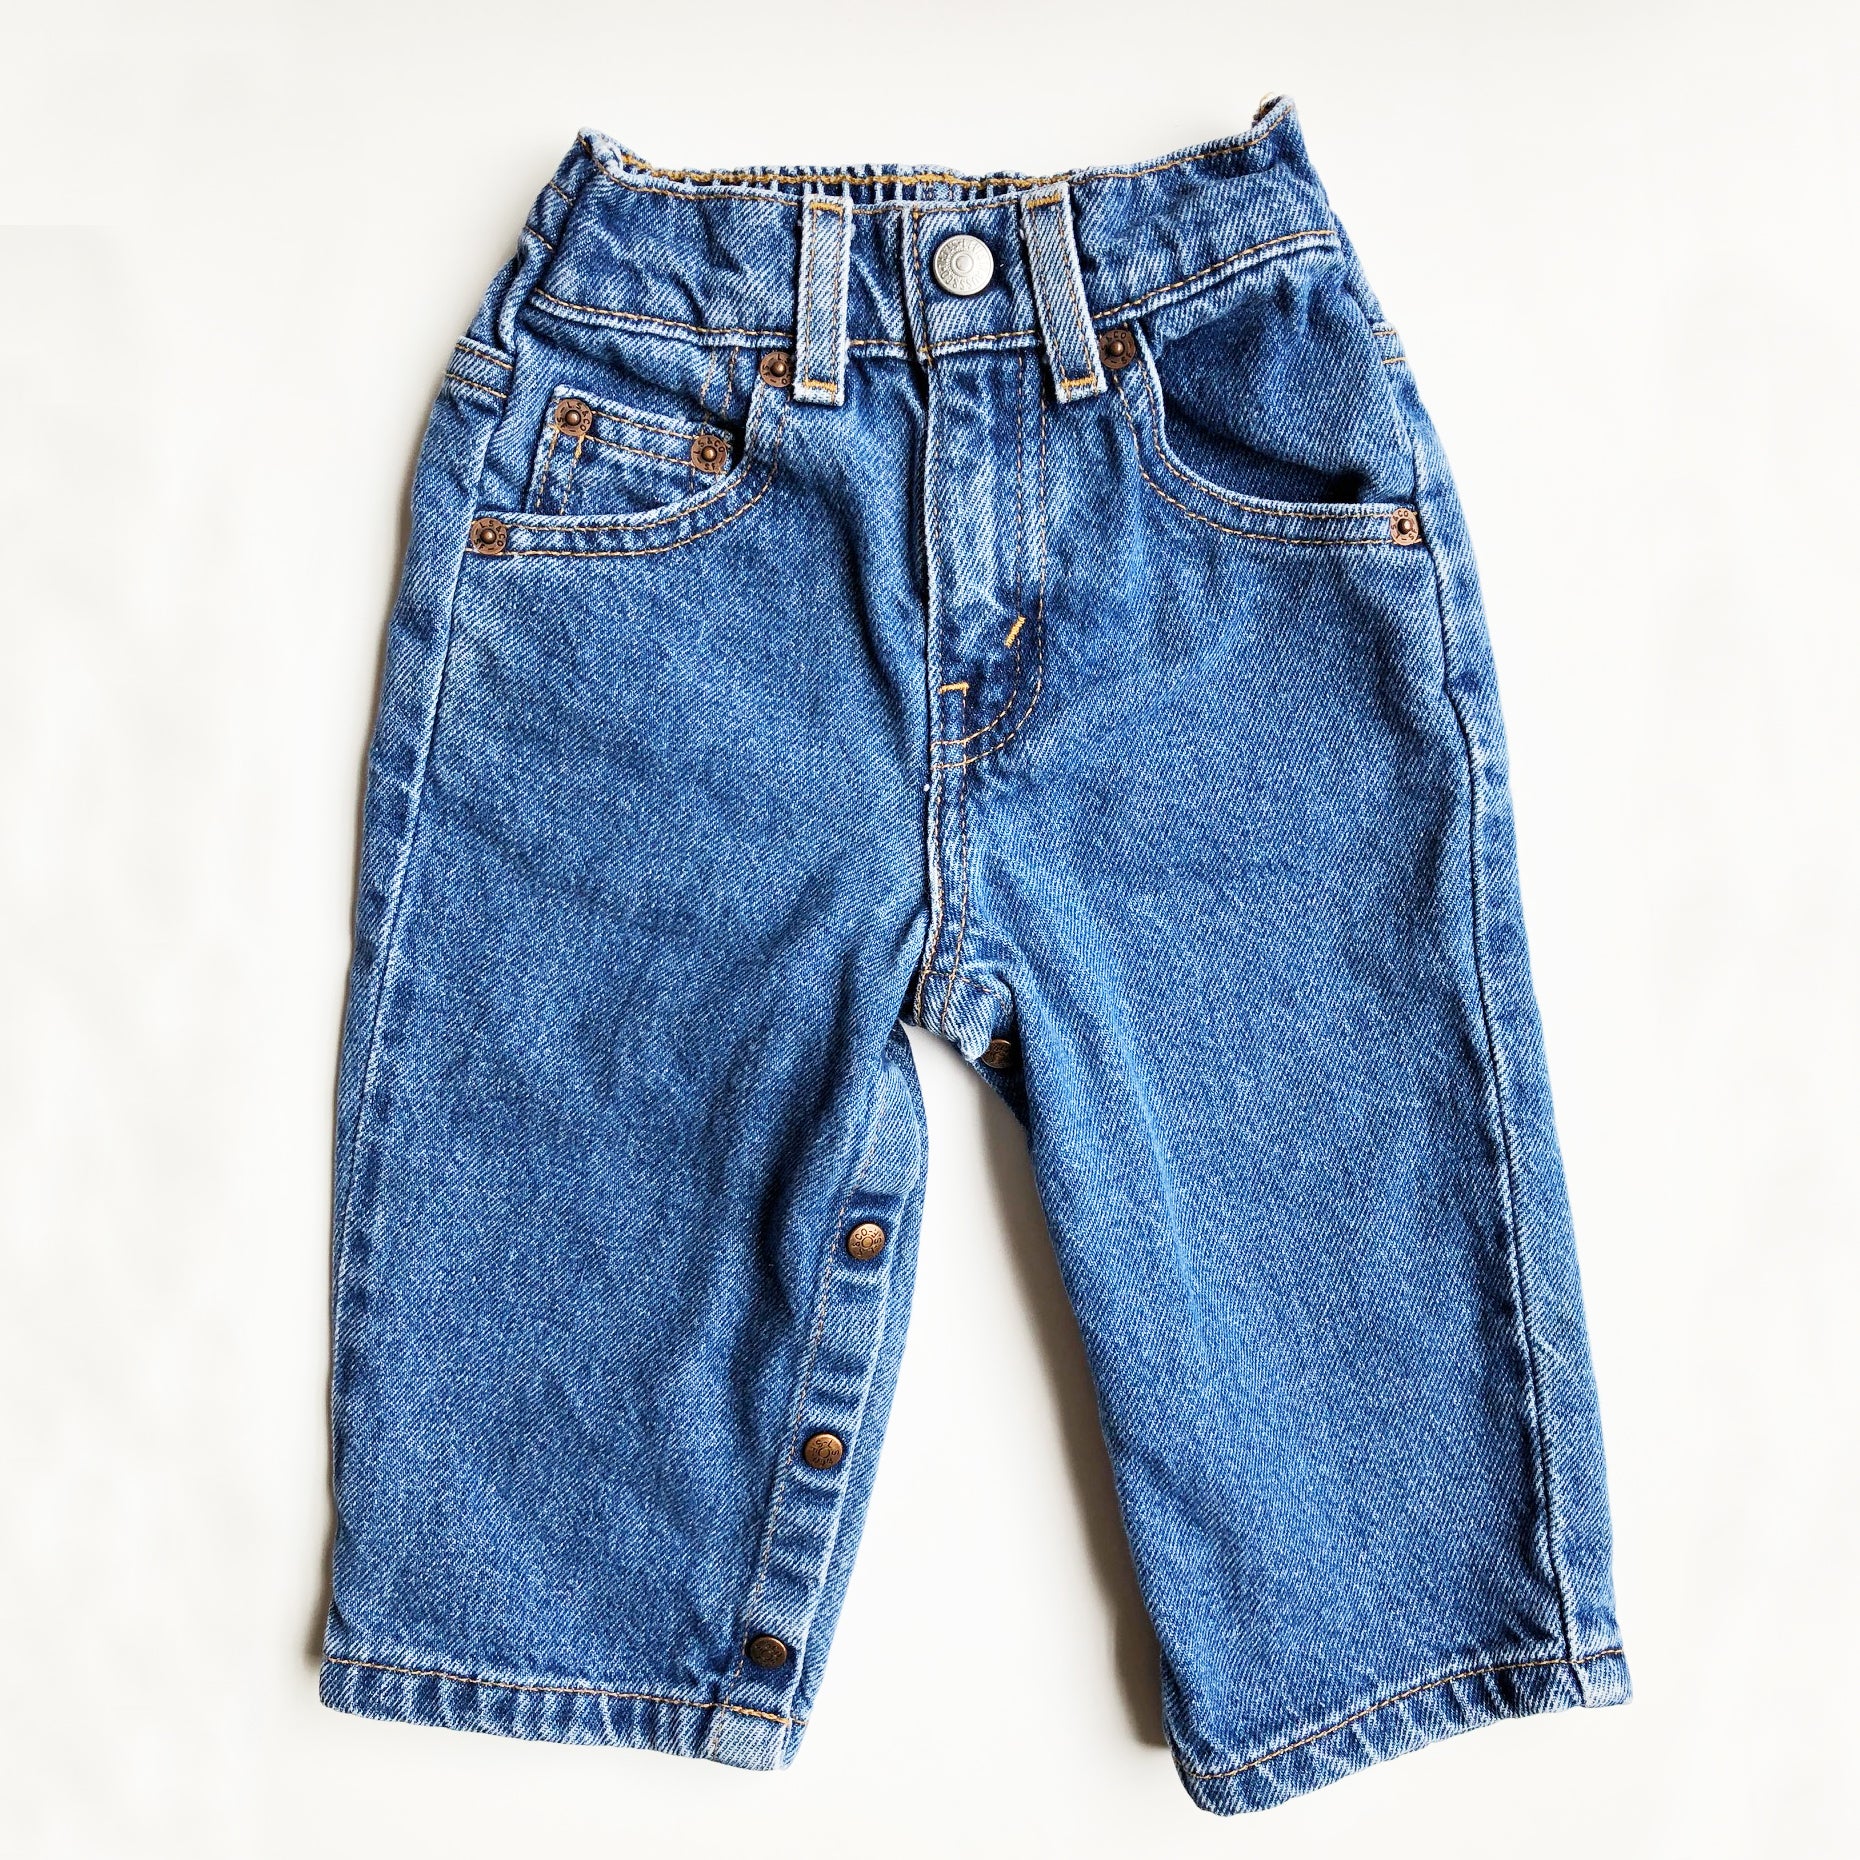 Little Pre-loved Levis Size 12-18 months